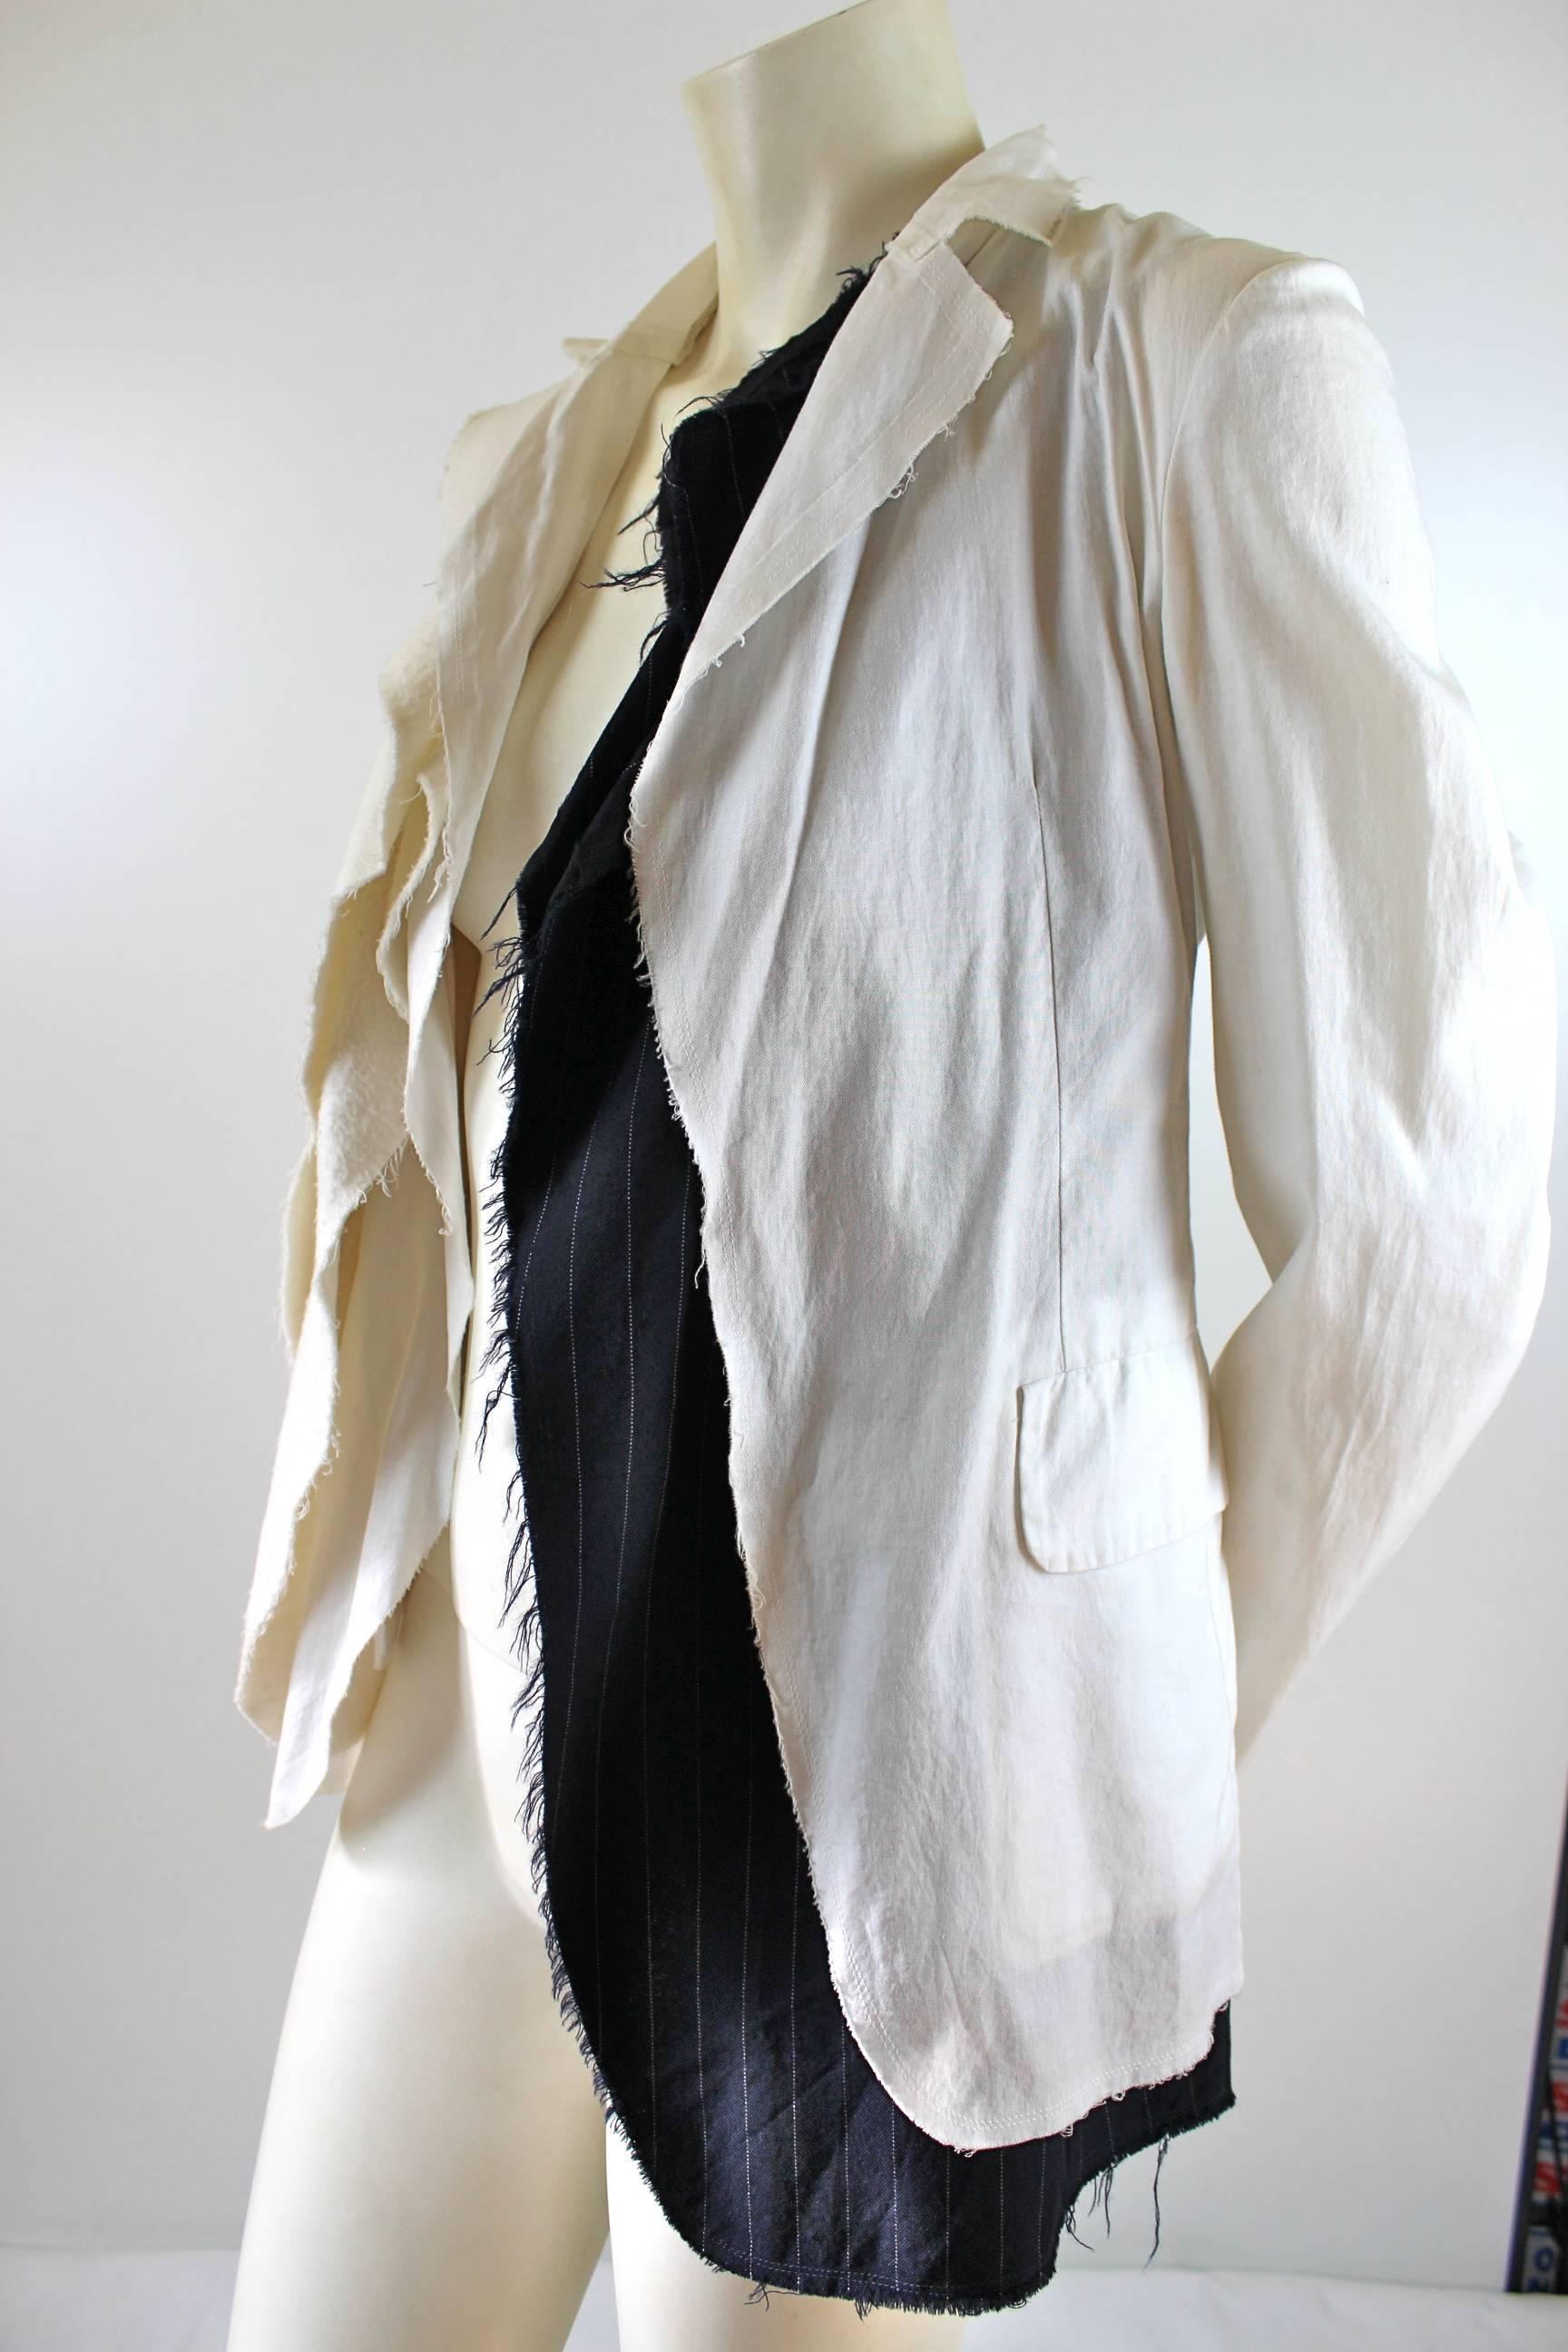 Women's Comme des Garcons AD 2002 Raw Construction Runway Jacket